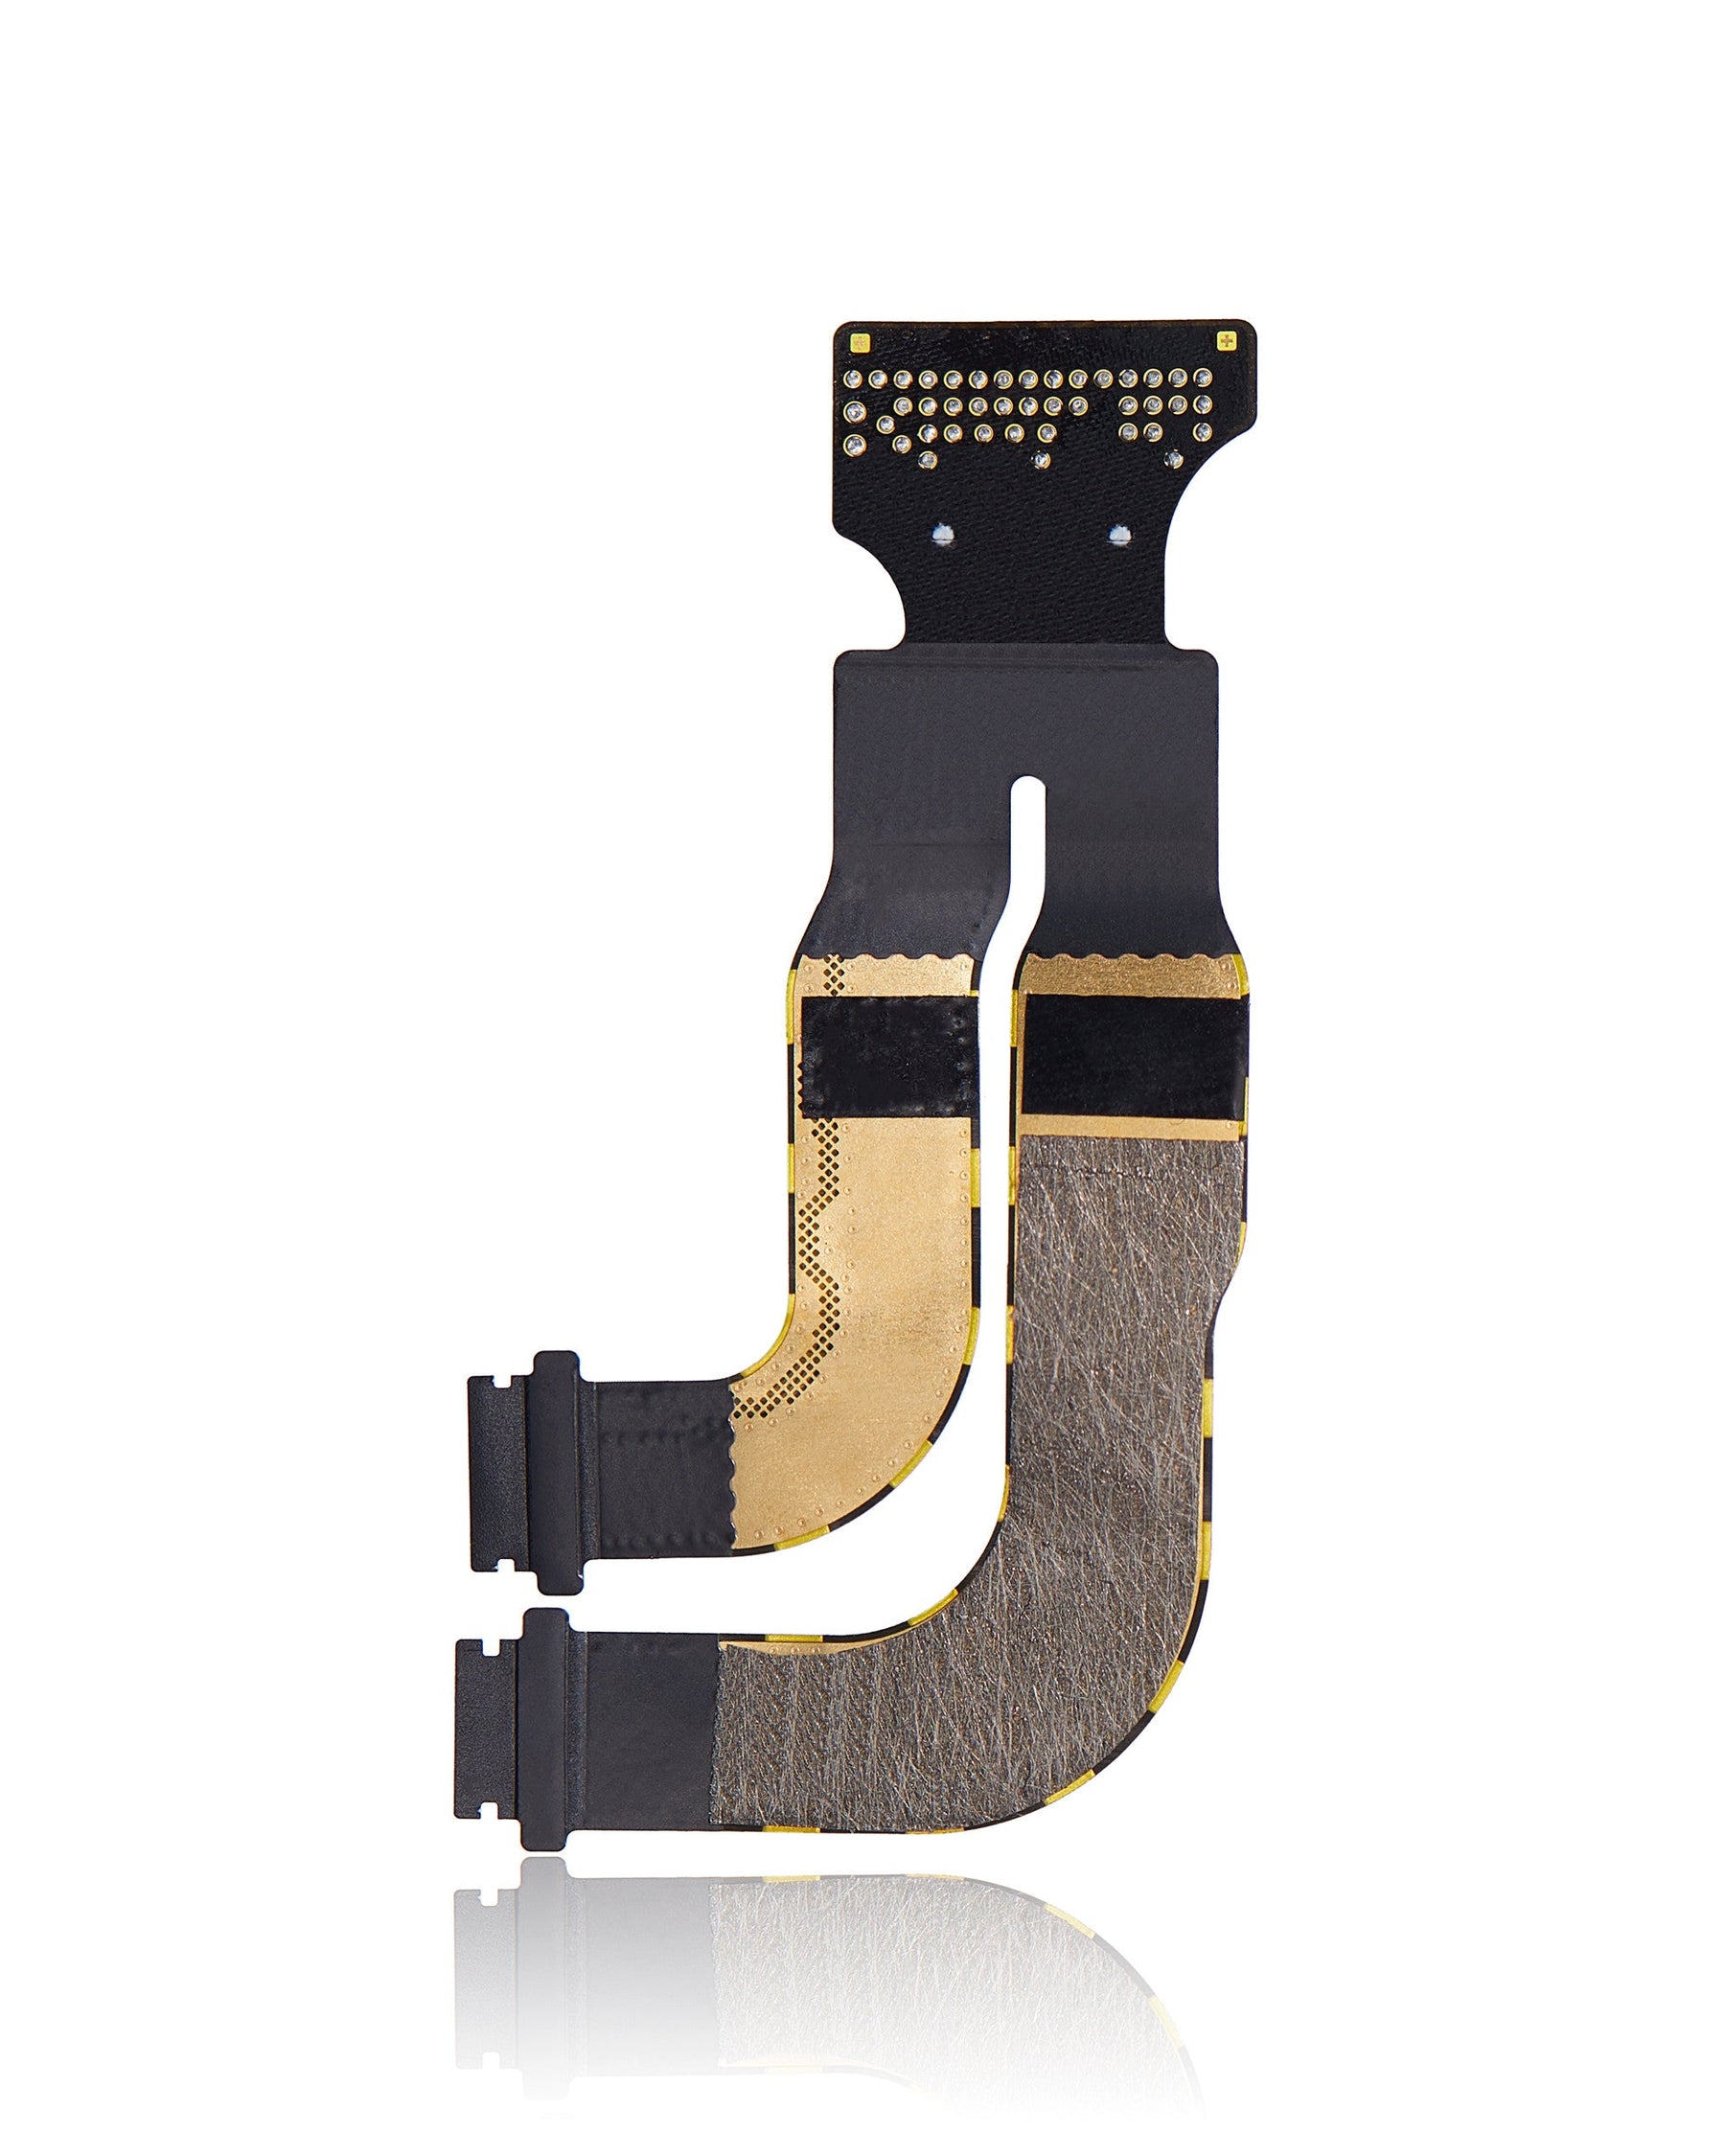 LCD FLEX CABLE FOR APPLE WATCH SERIES 7TH 41MM